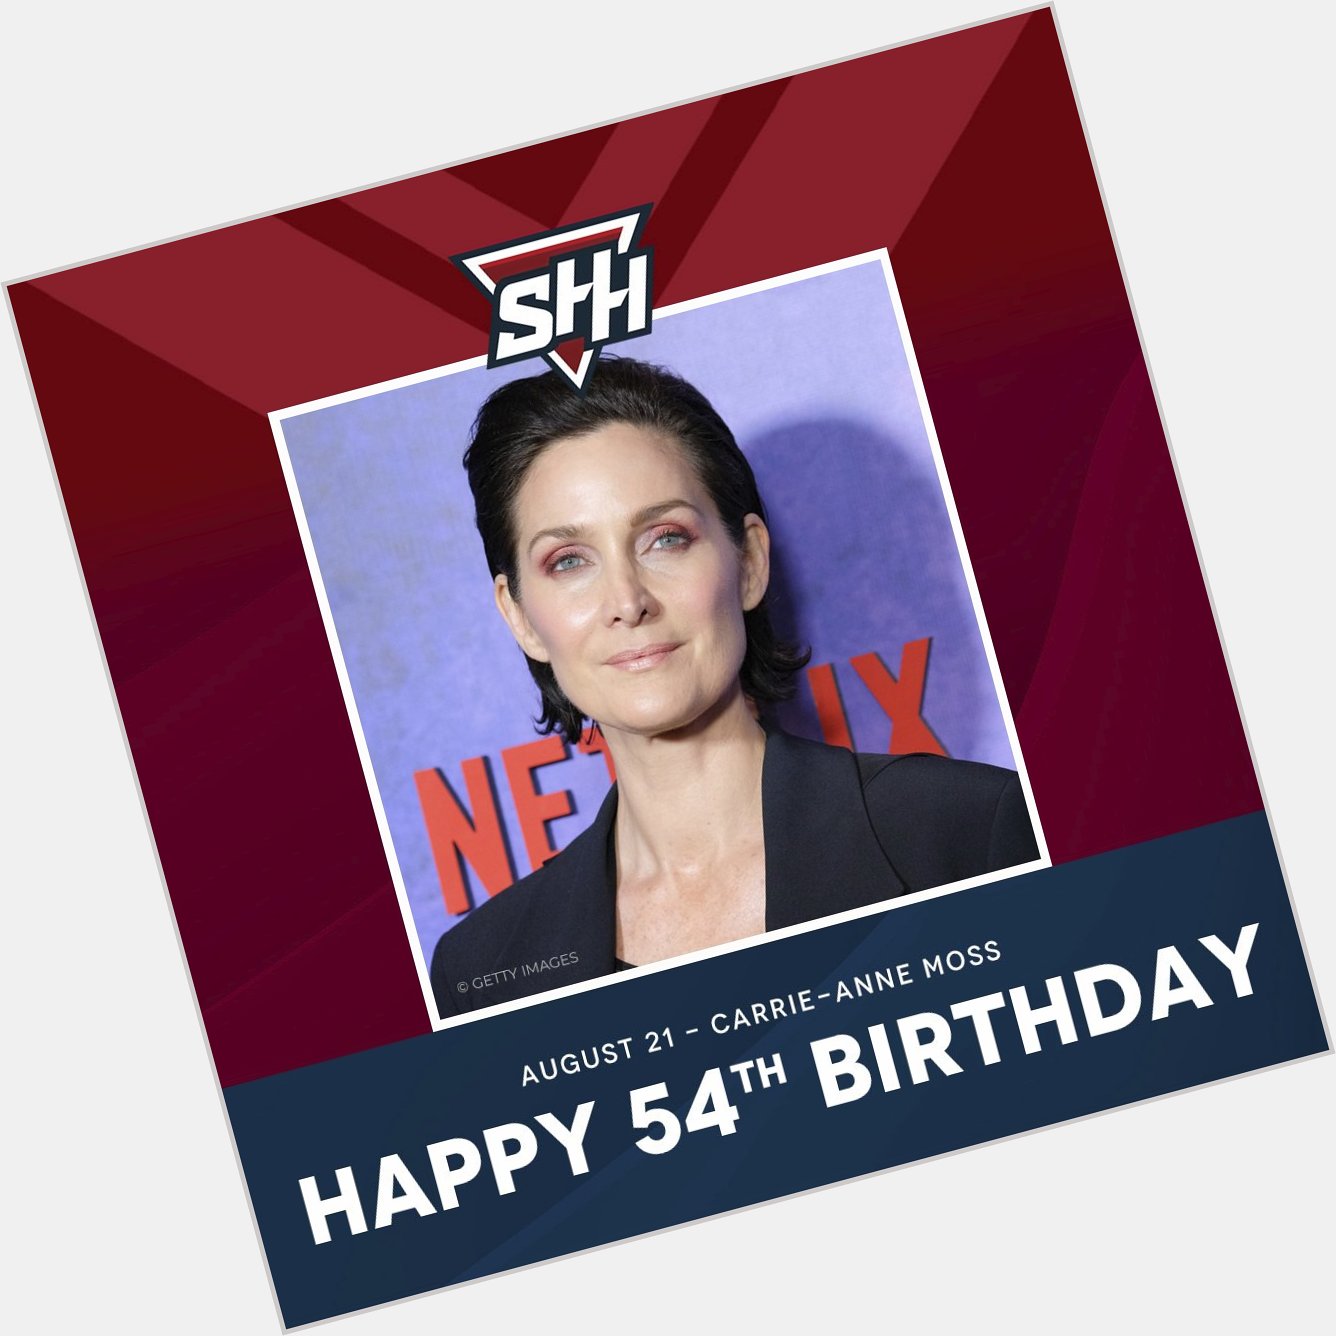 Happy Birthday, Carrie-Anne Moss! 